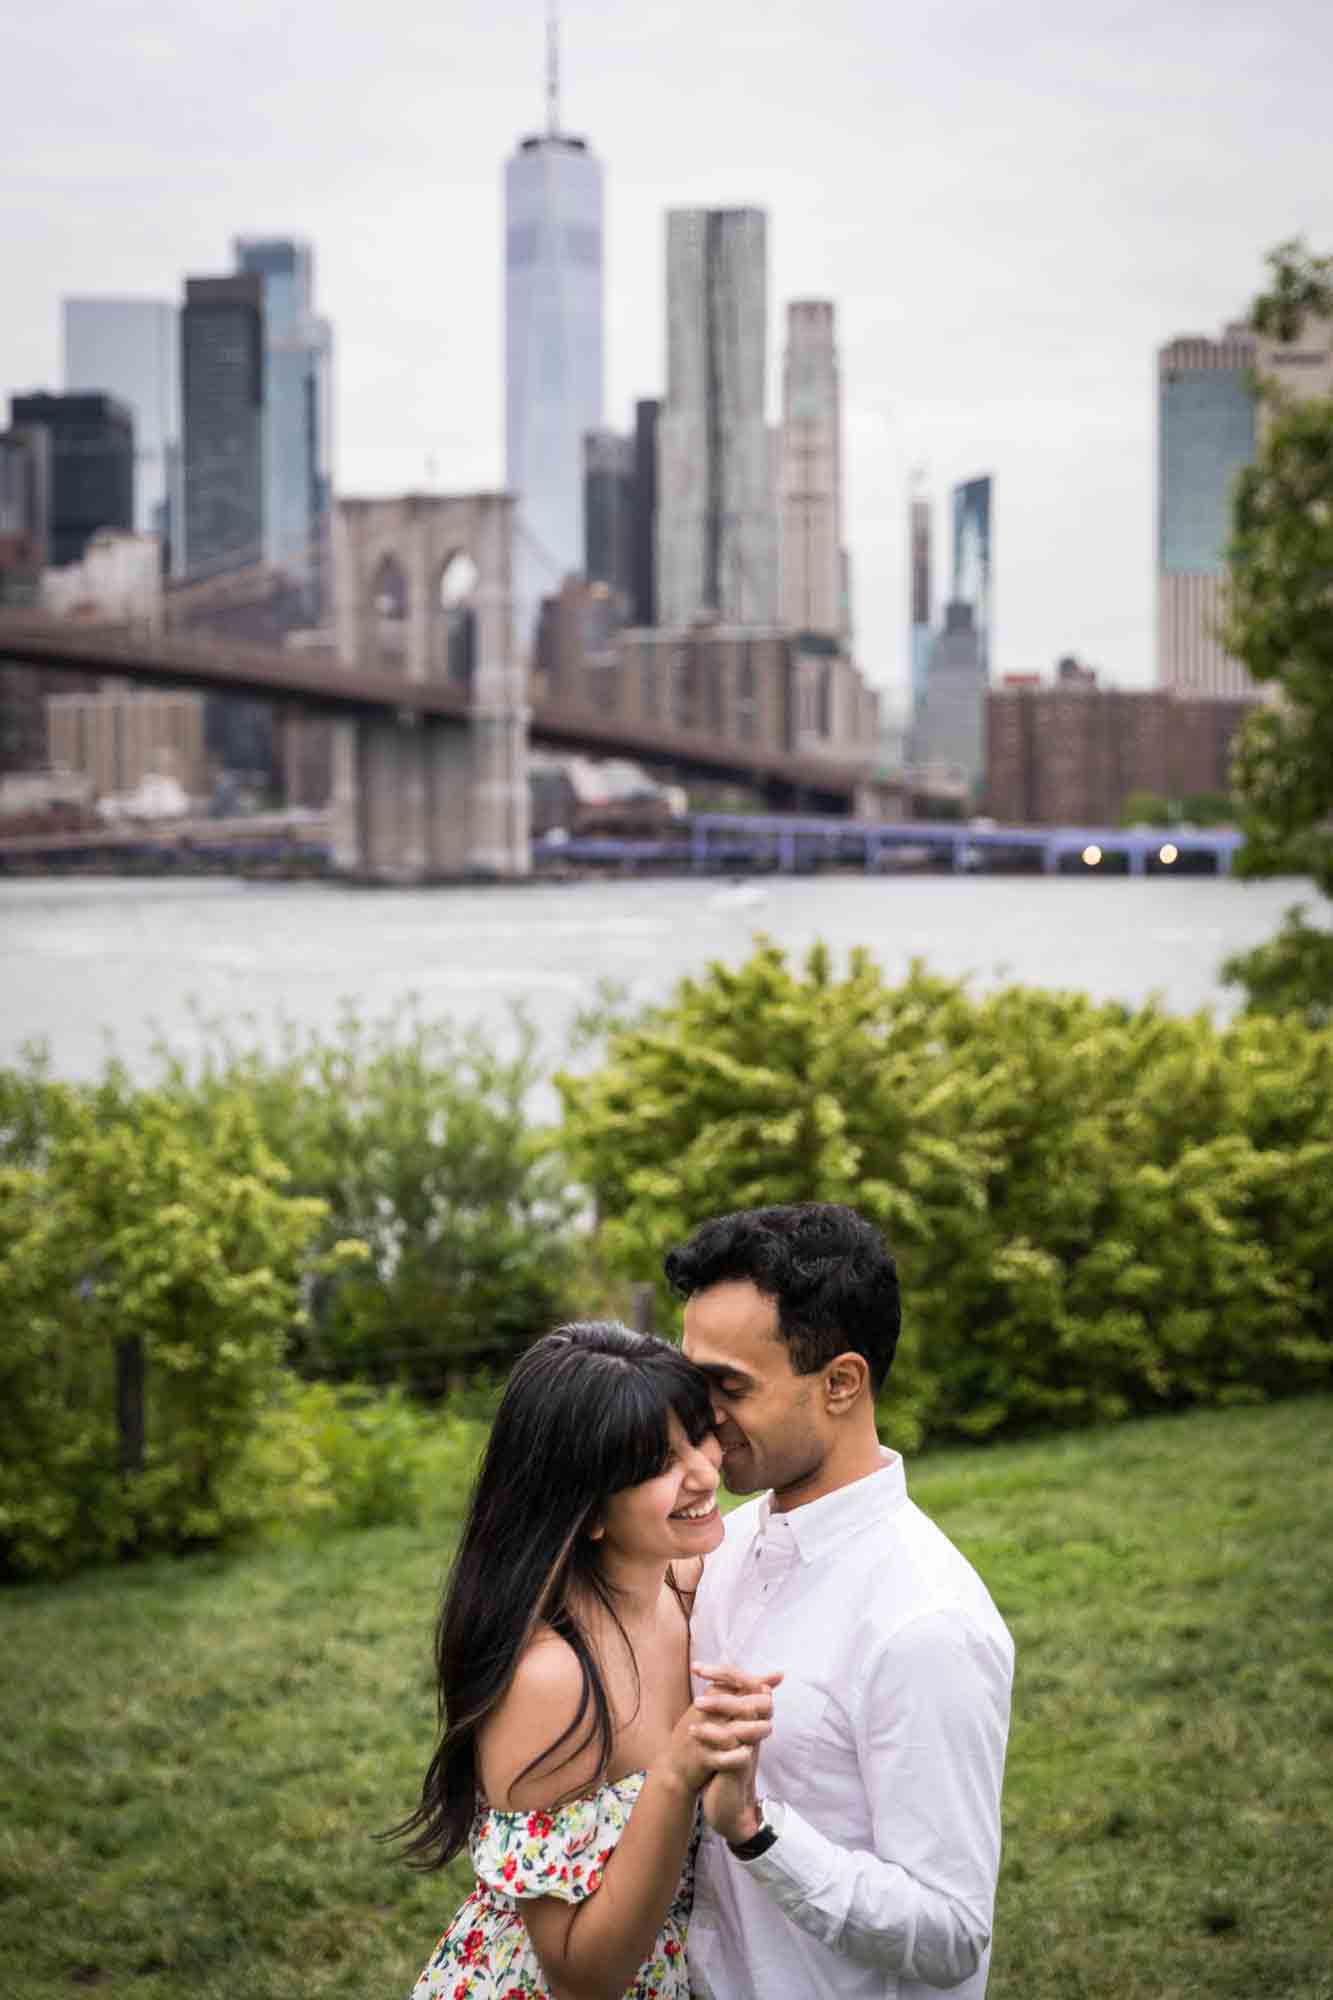 Couple dancing in grass with NYC skyline in background during a Brooklyn Bridge Park engagement photo shoot